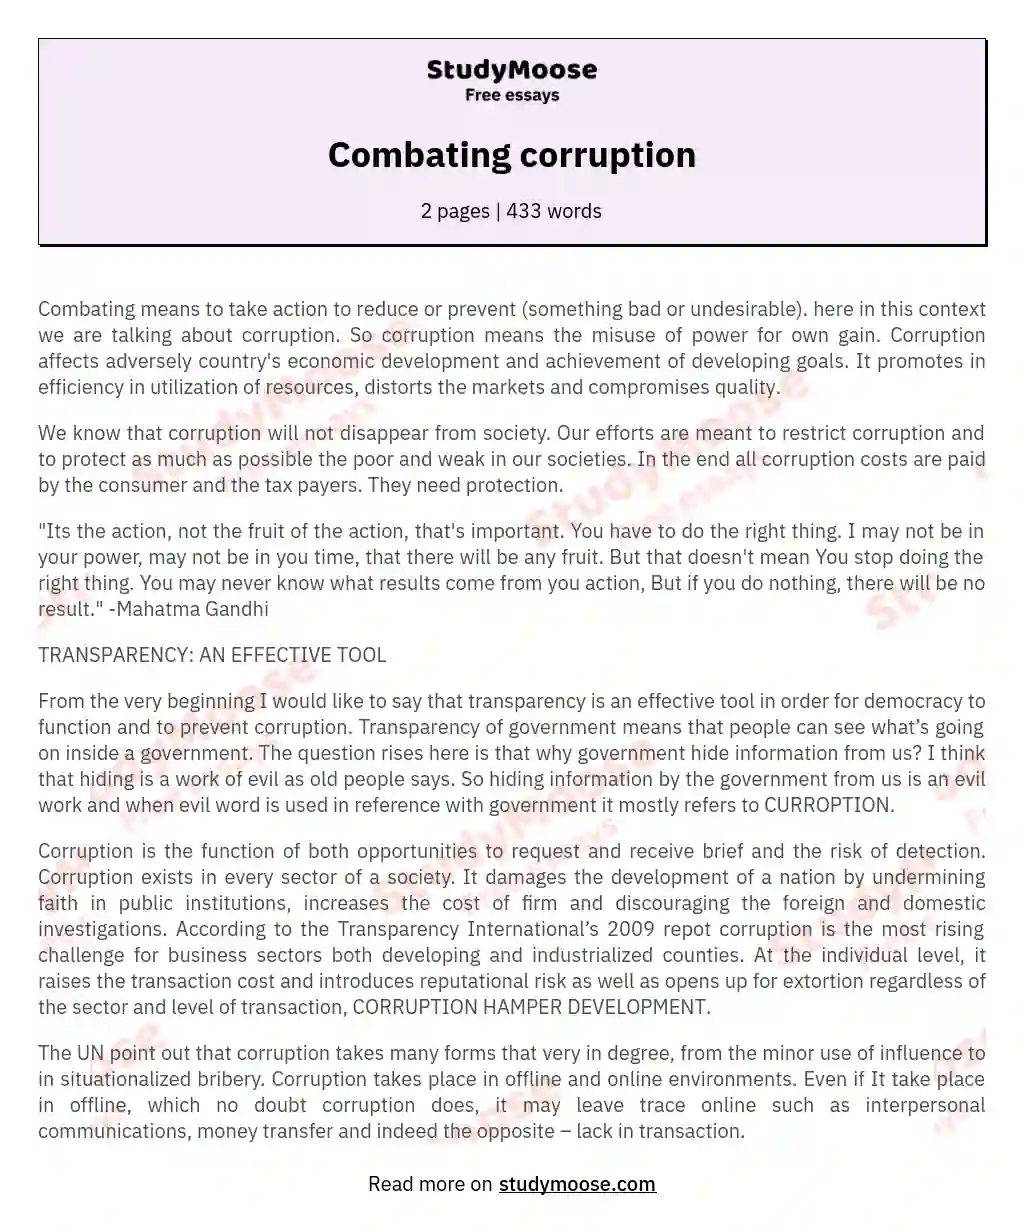 The Role of Transparency in Combating Corruption essay